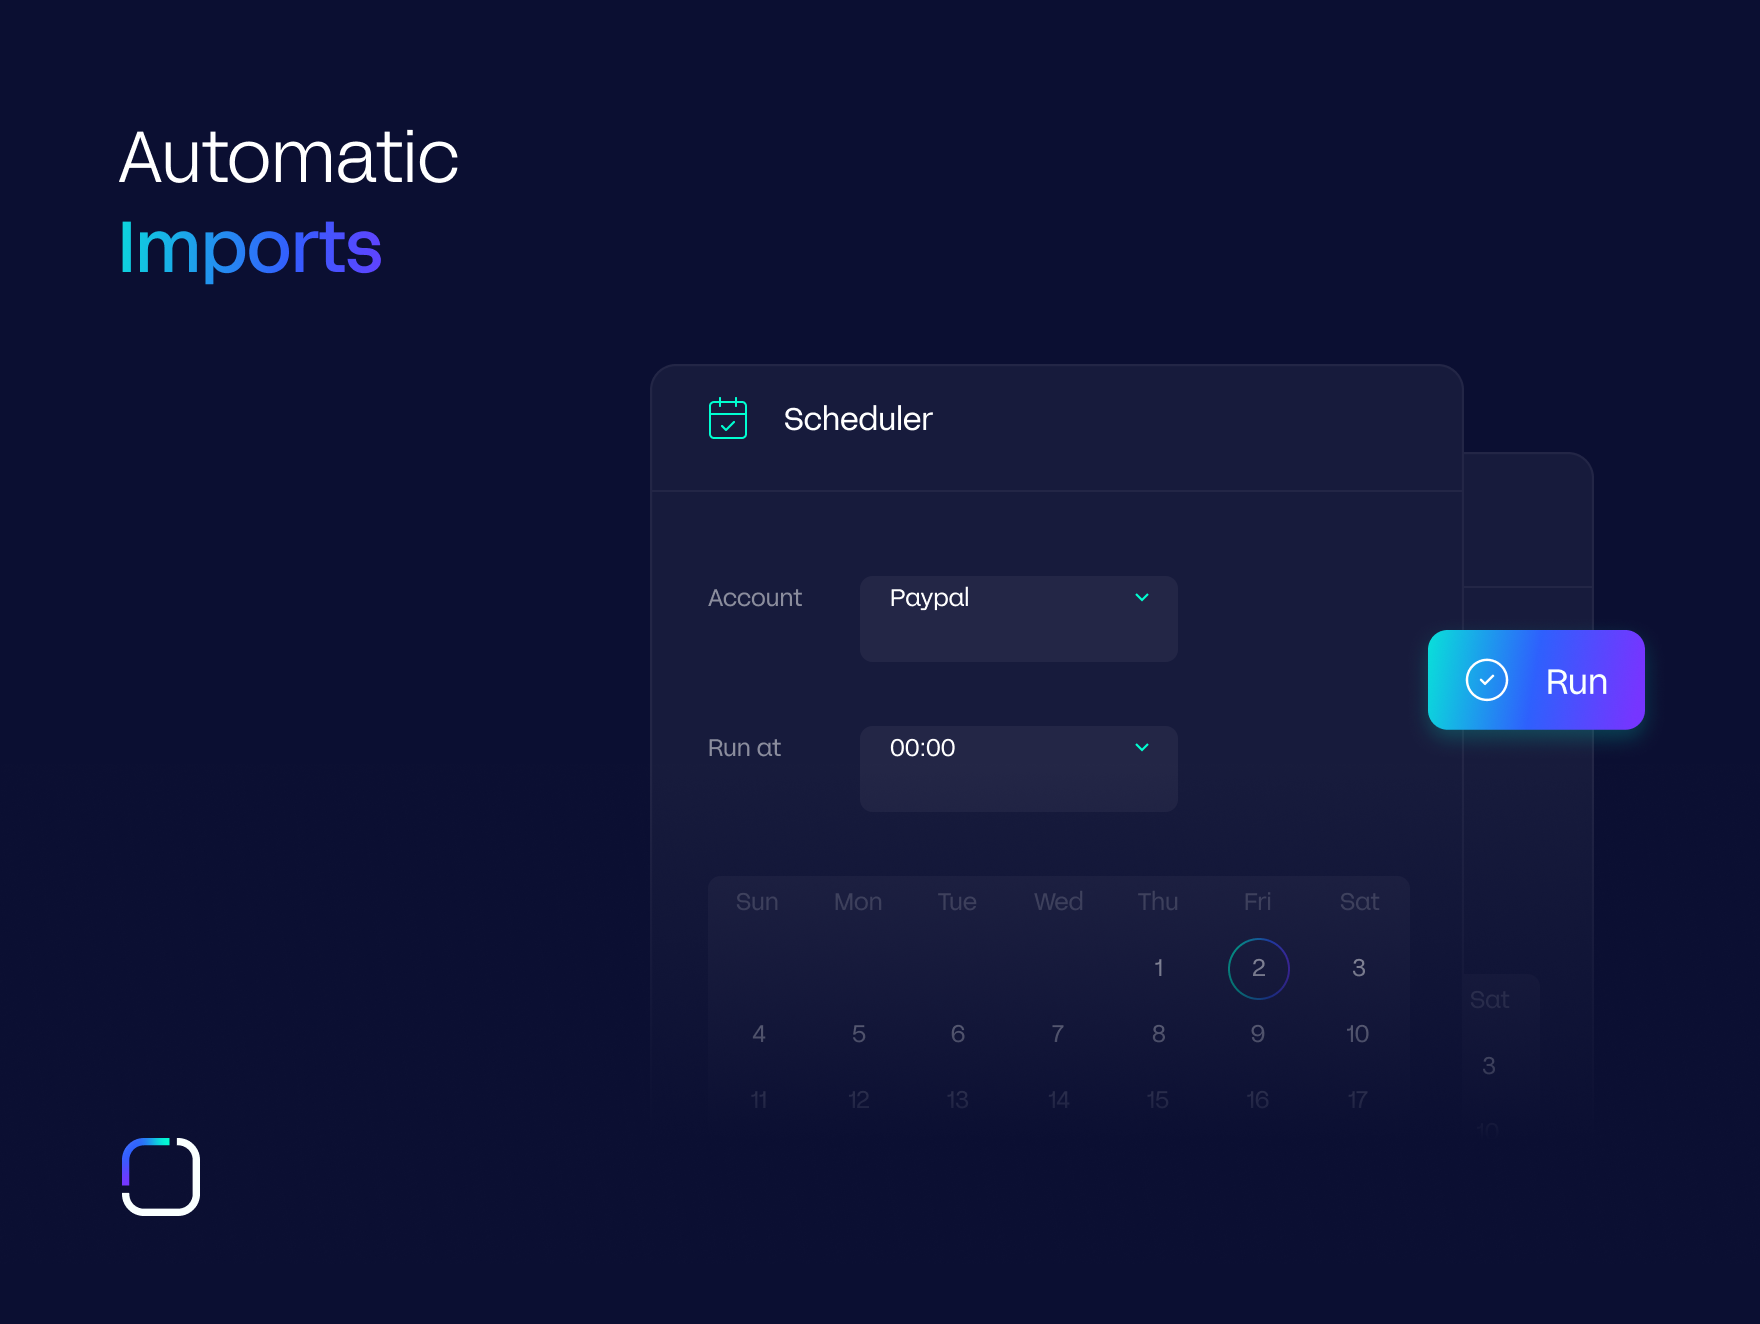 Schedule automatic imports for when you're sleeping so you can start the day with most of the job done.